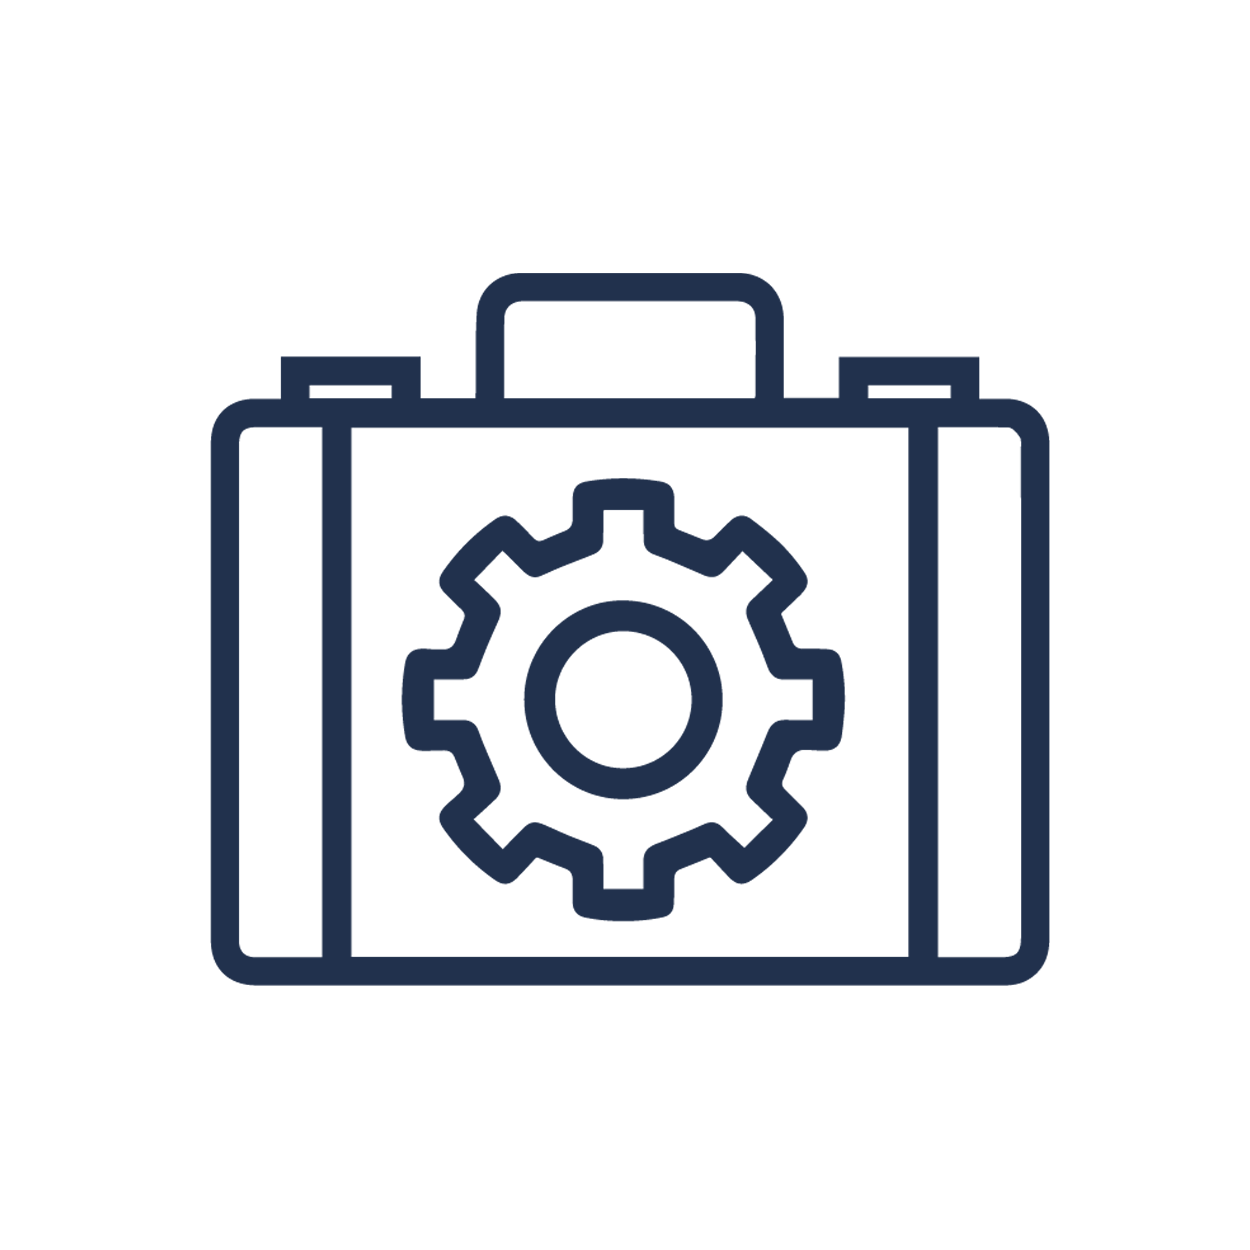 Briefcase with gears icon